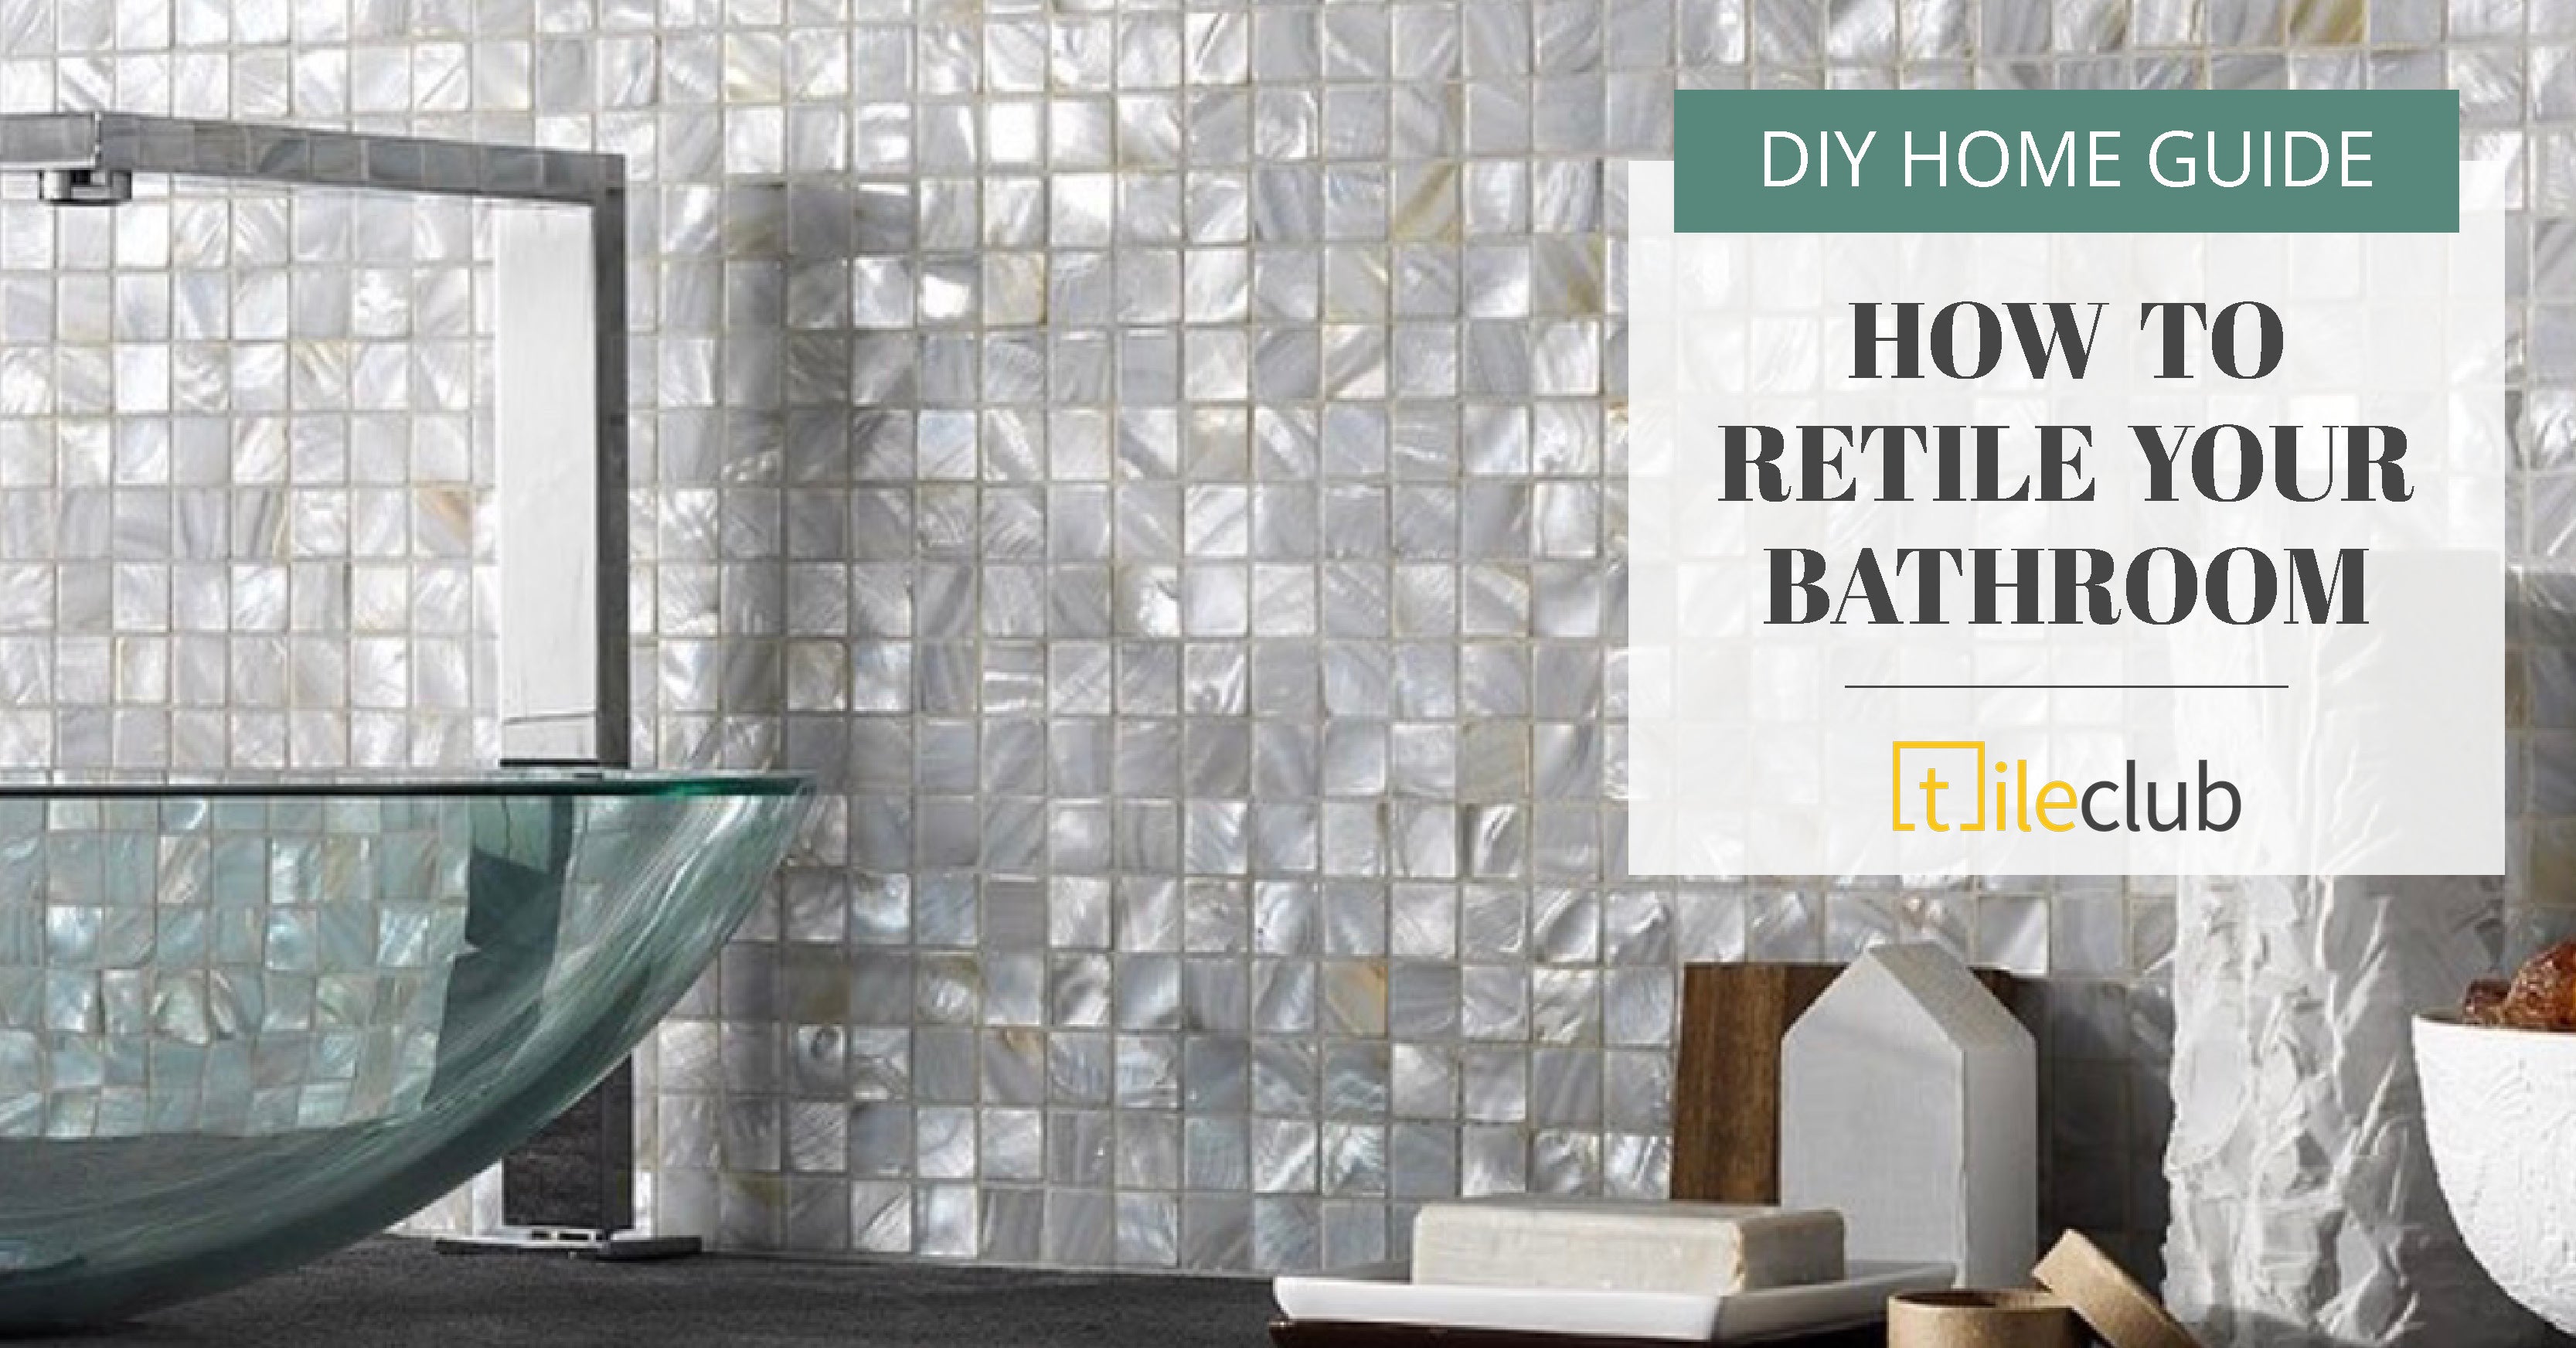 How to Retile a Bathroom: A Step-by-Step Guide